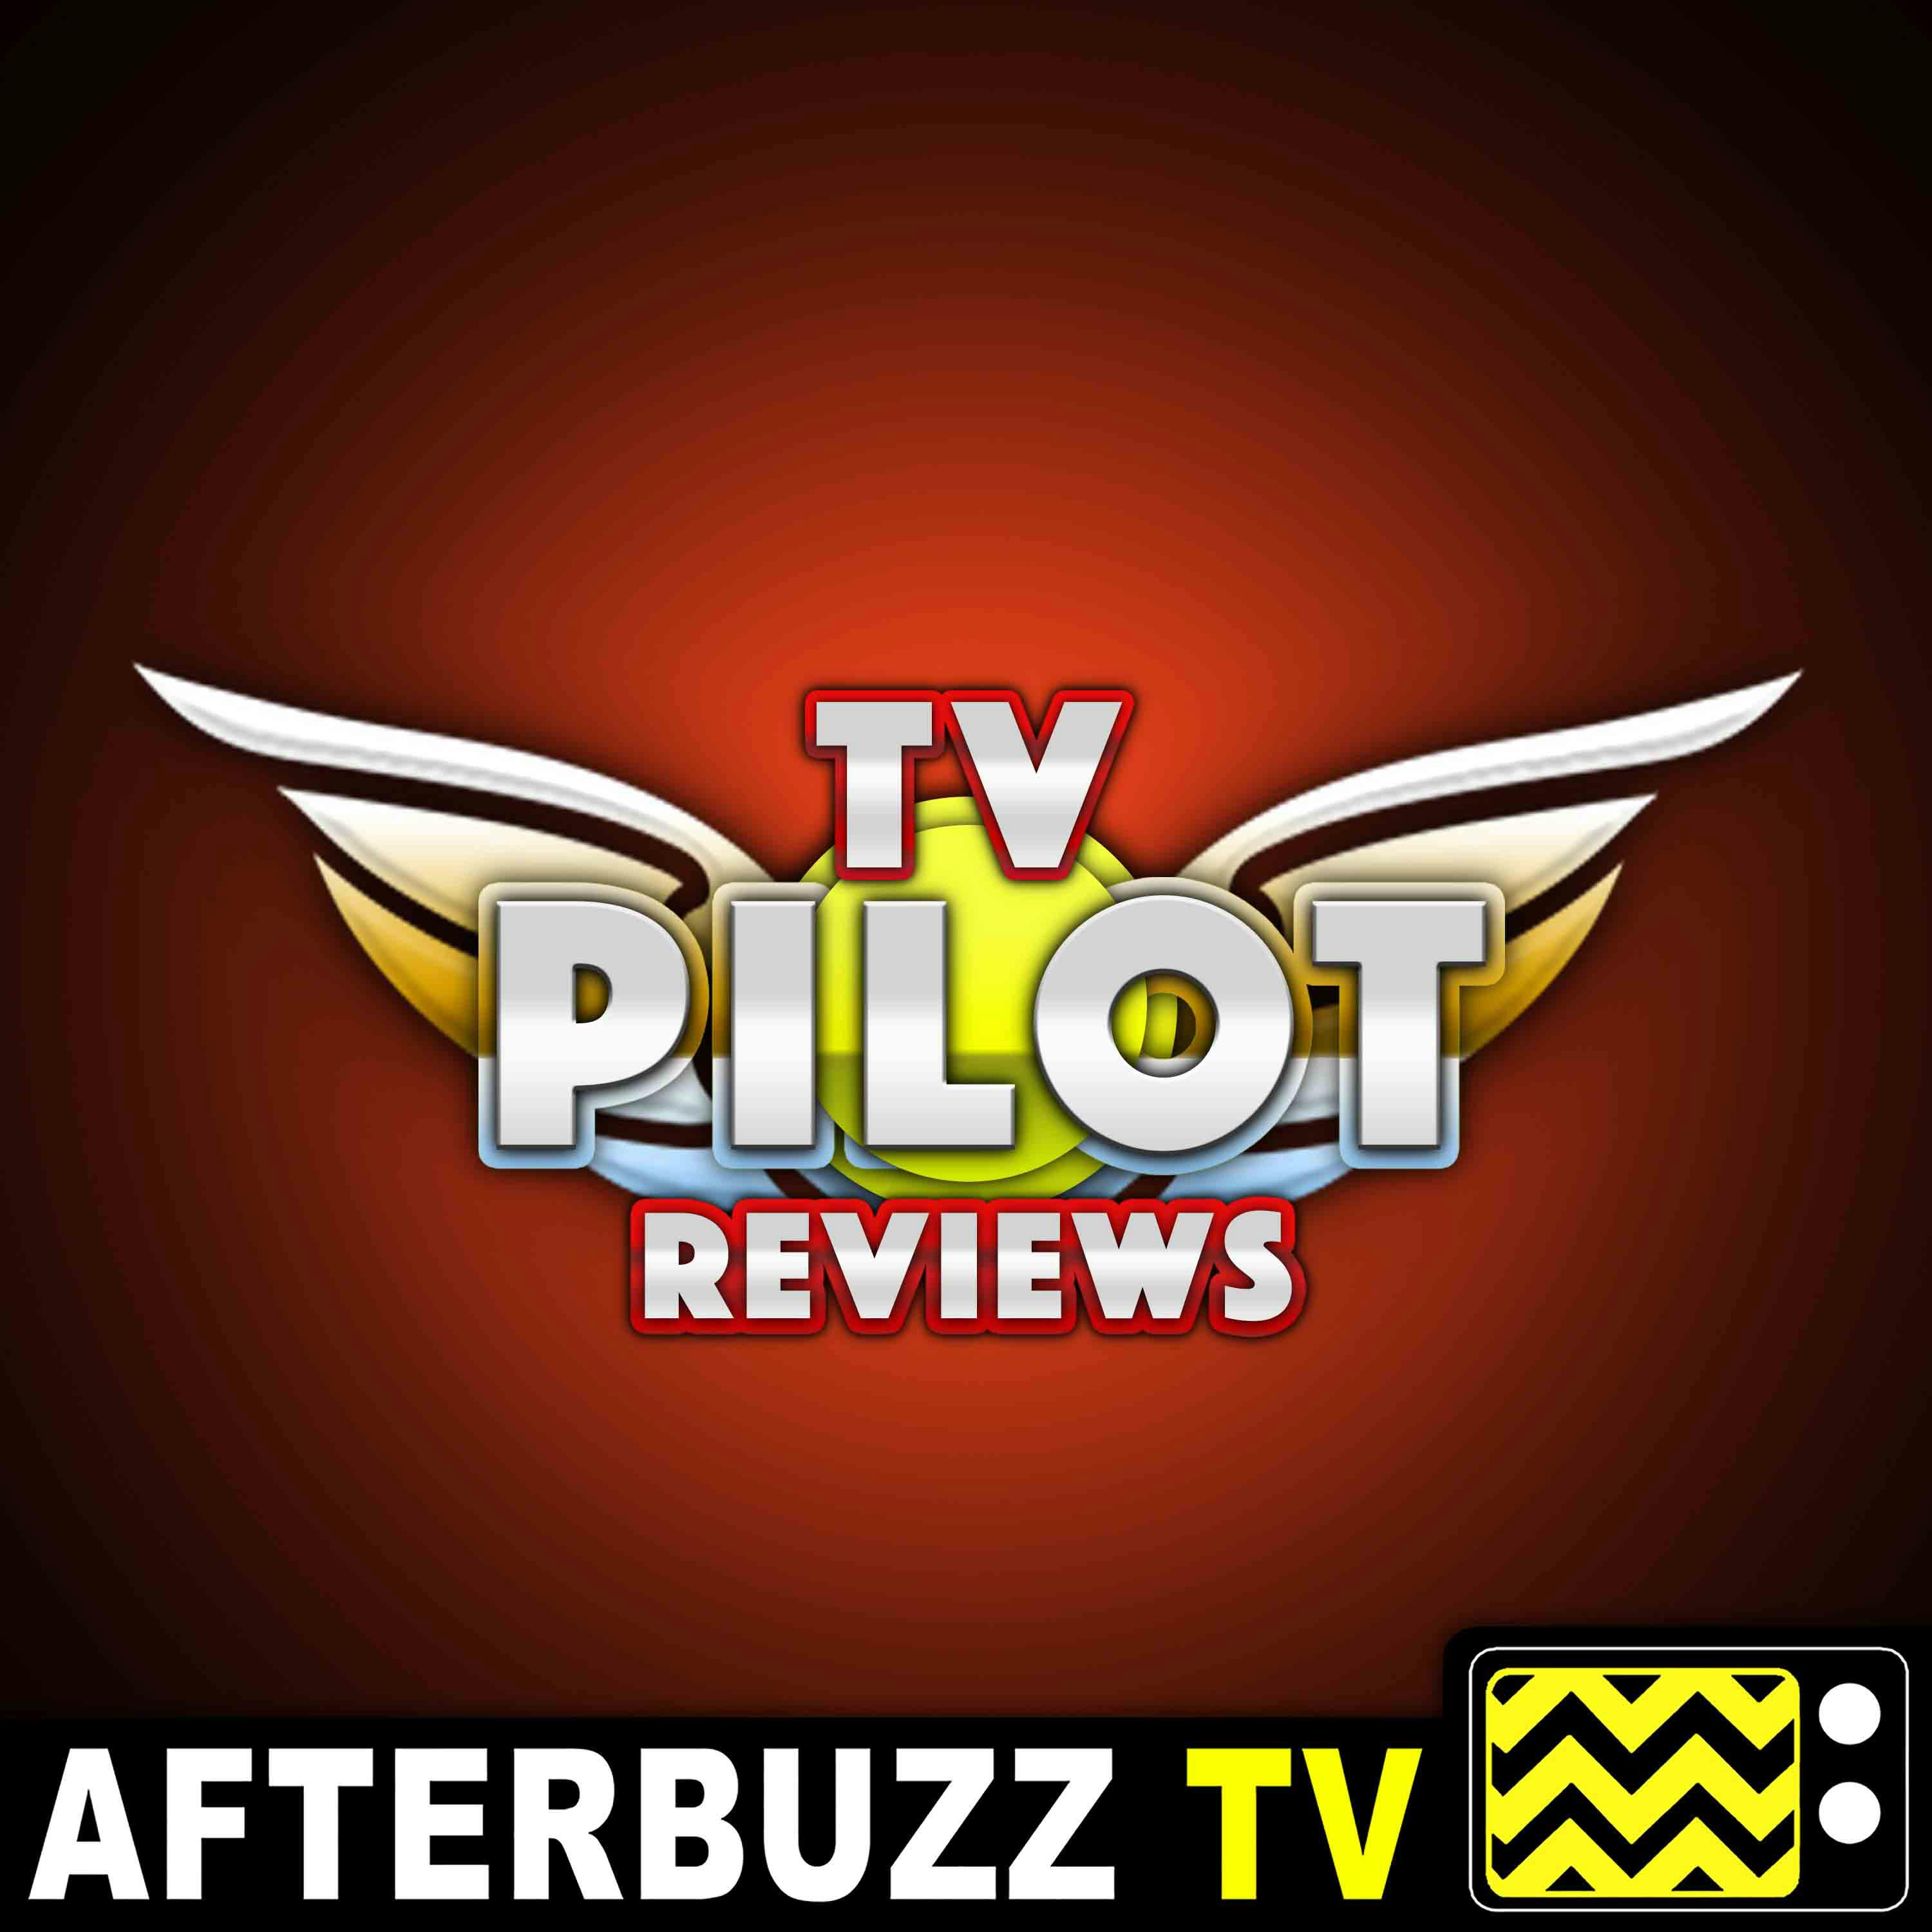 Should I watch Couples Therapy - TV Pilot Reviews | AfterBuzz TV